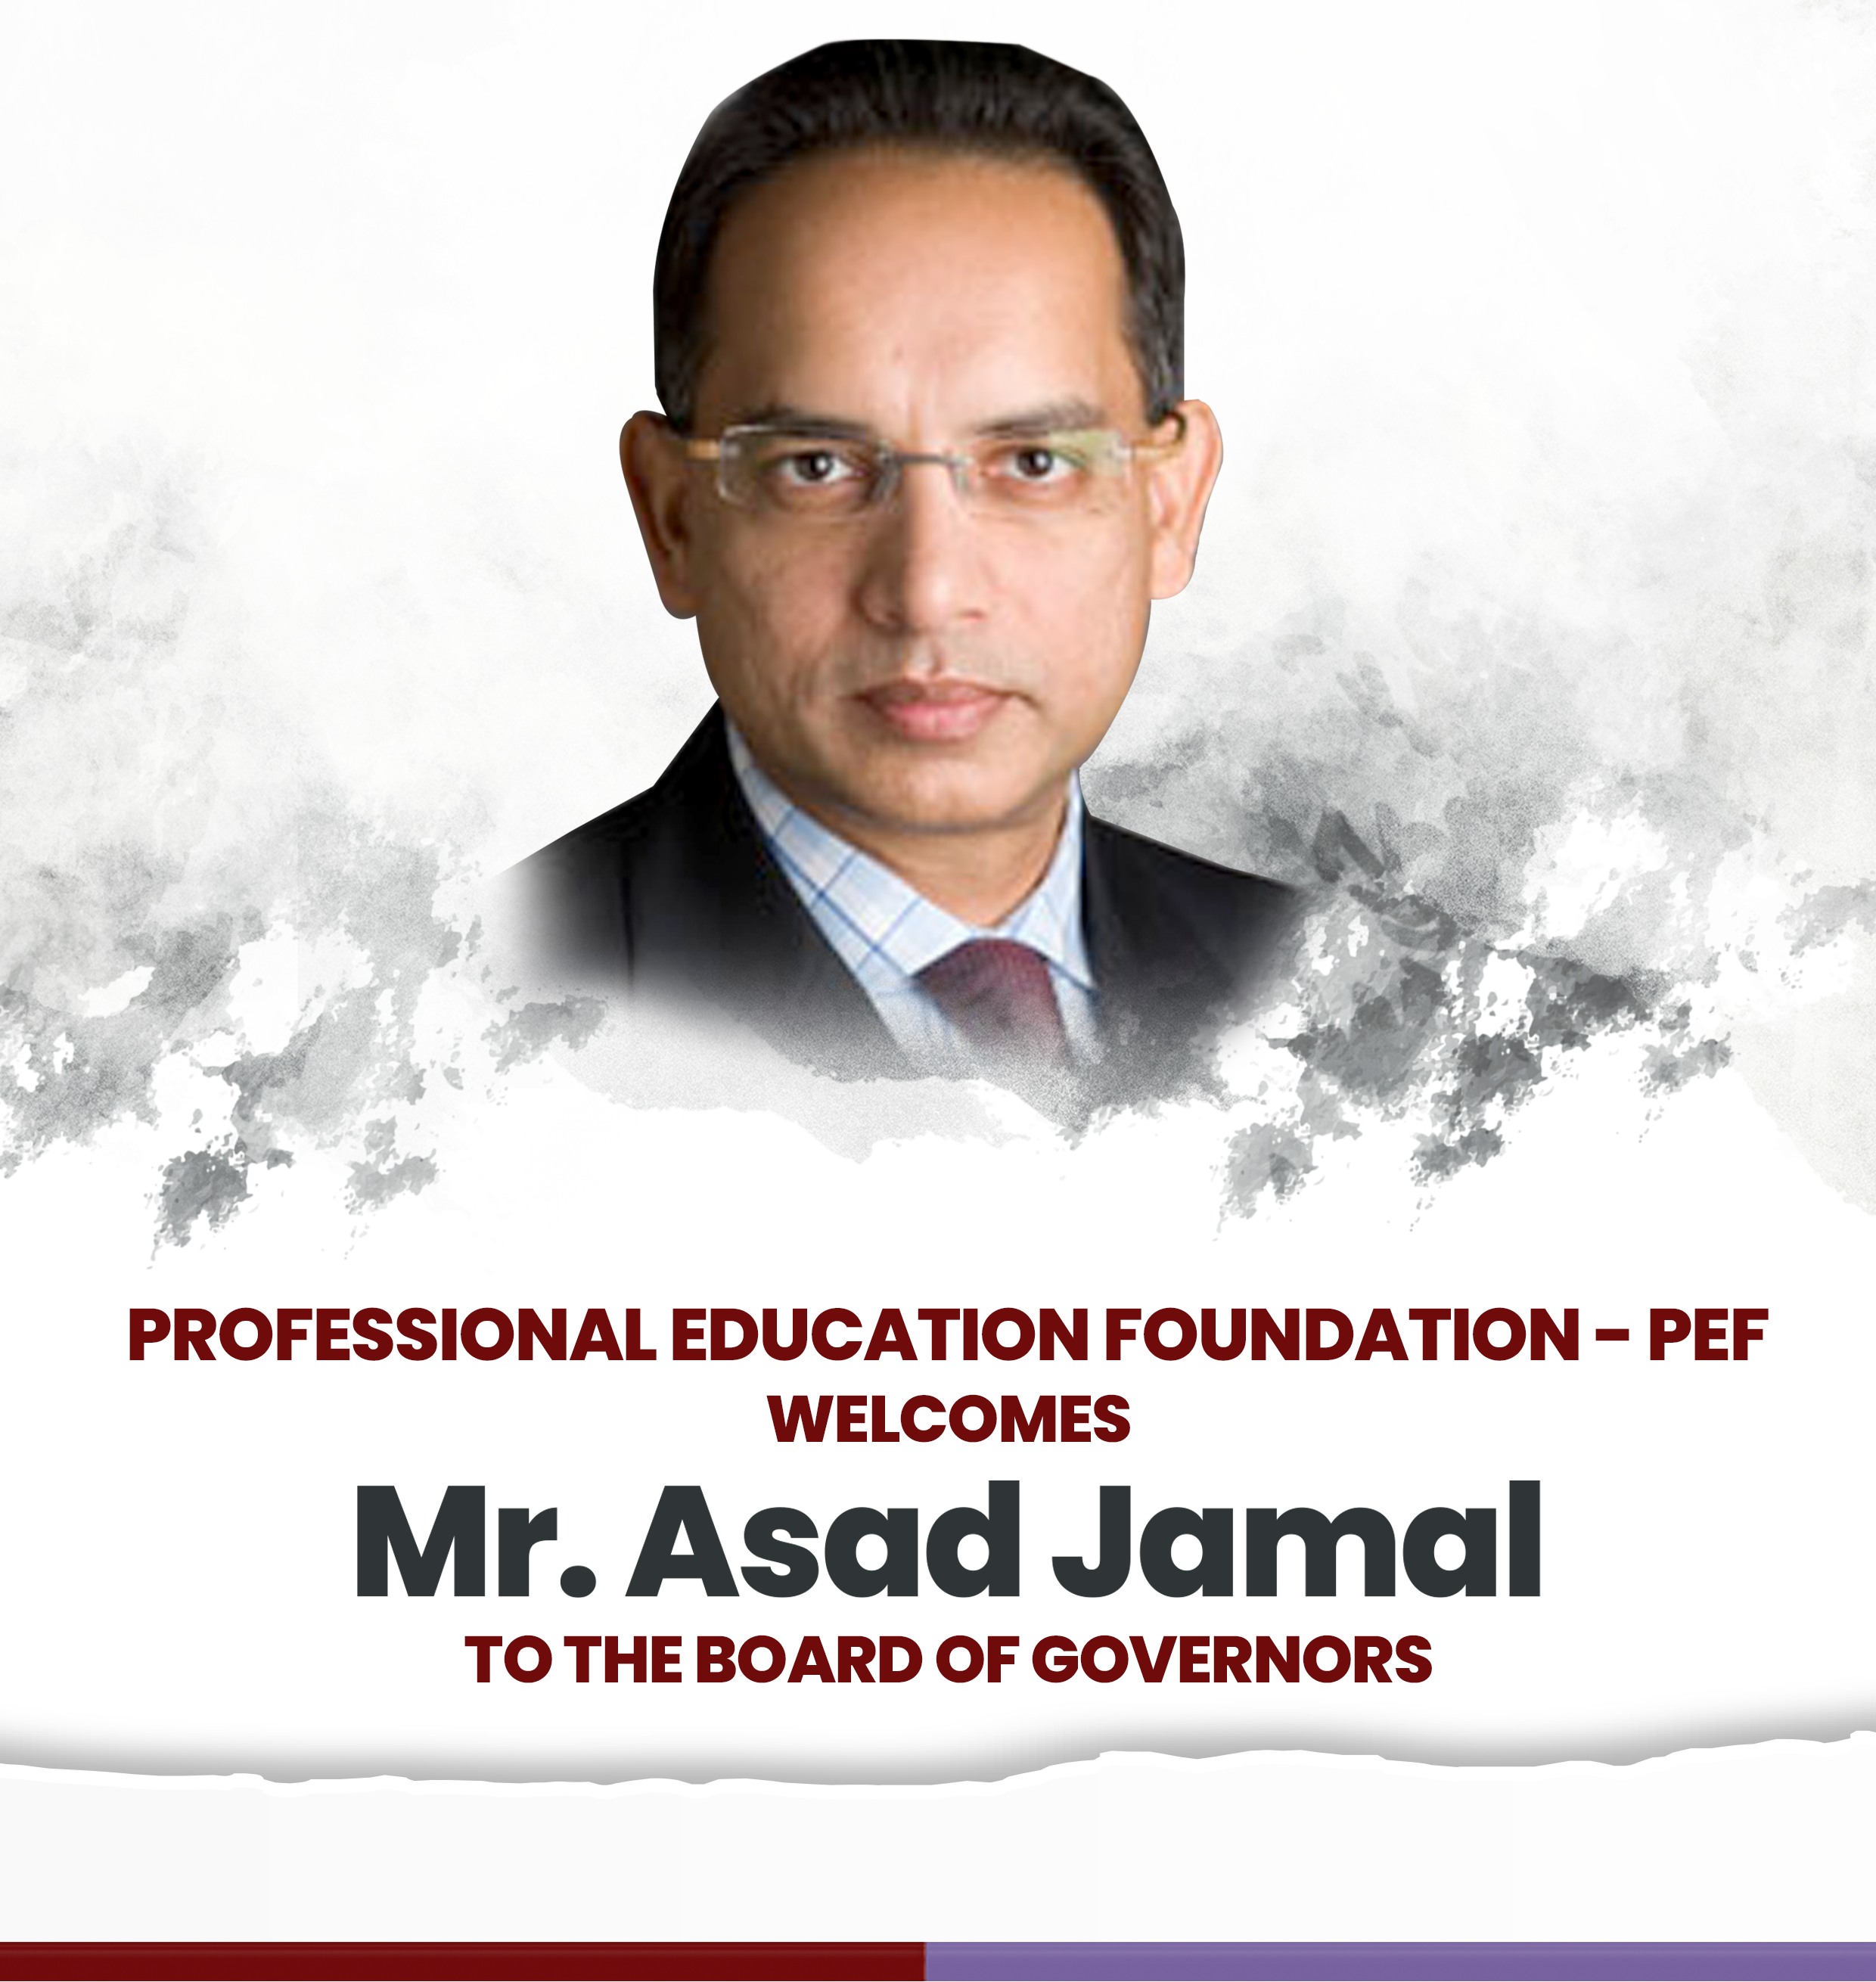 Mr. Asad Jamal as the largest donor of PEF in the FY 2022-23